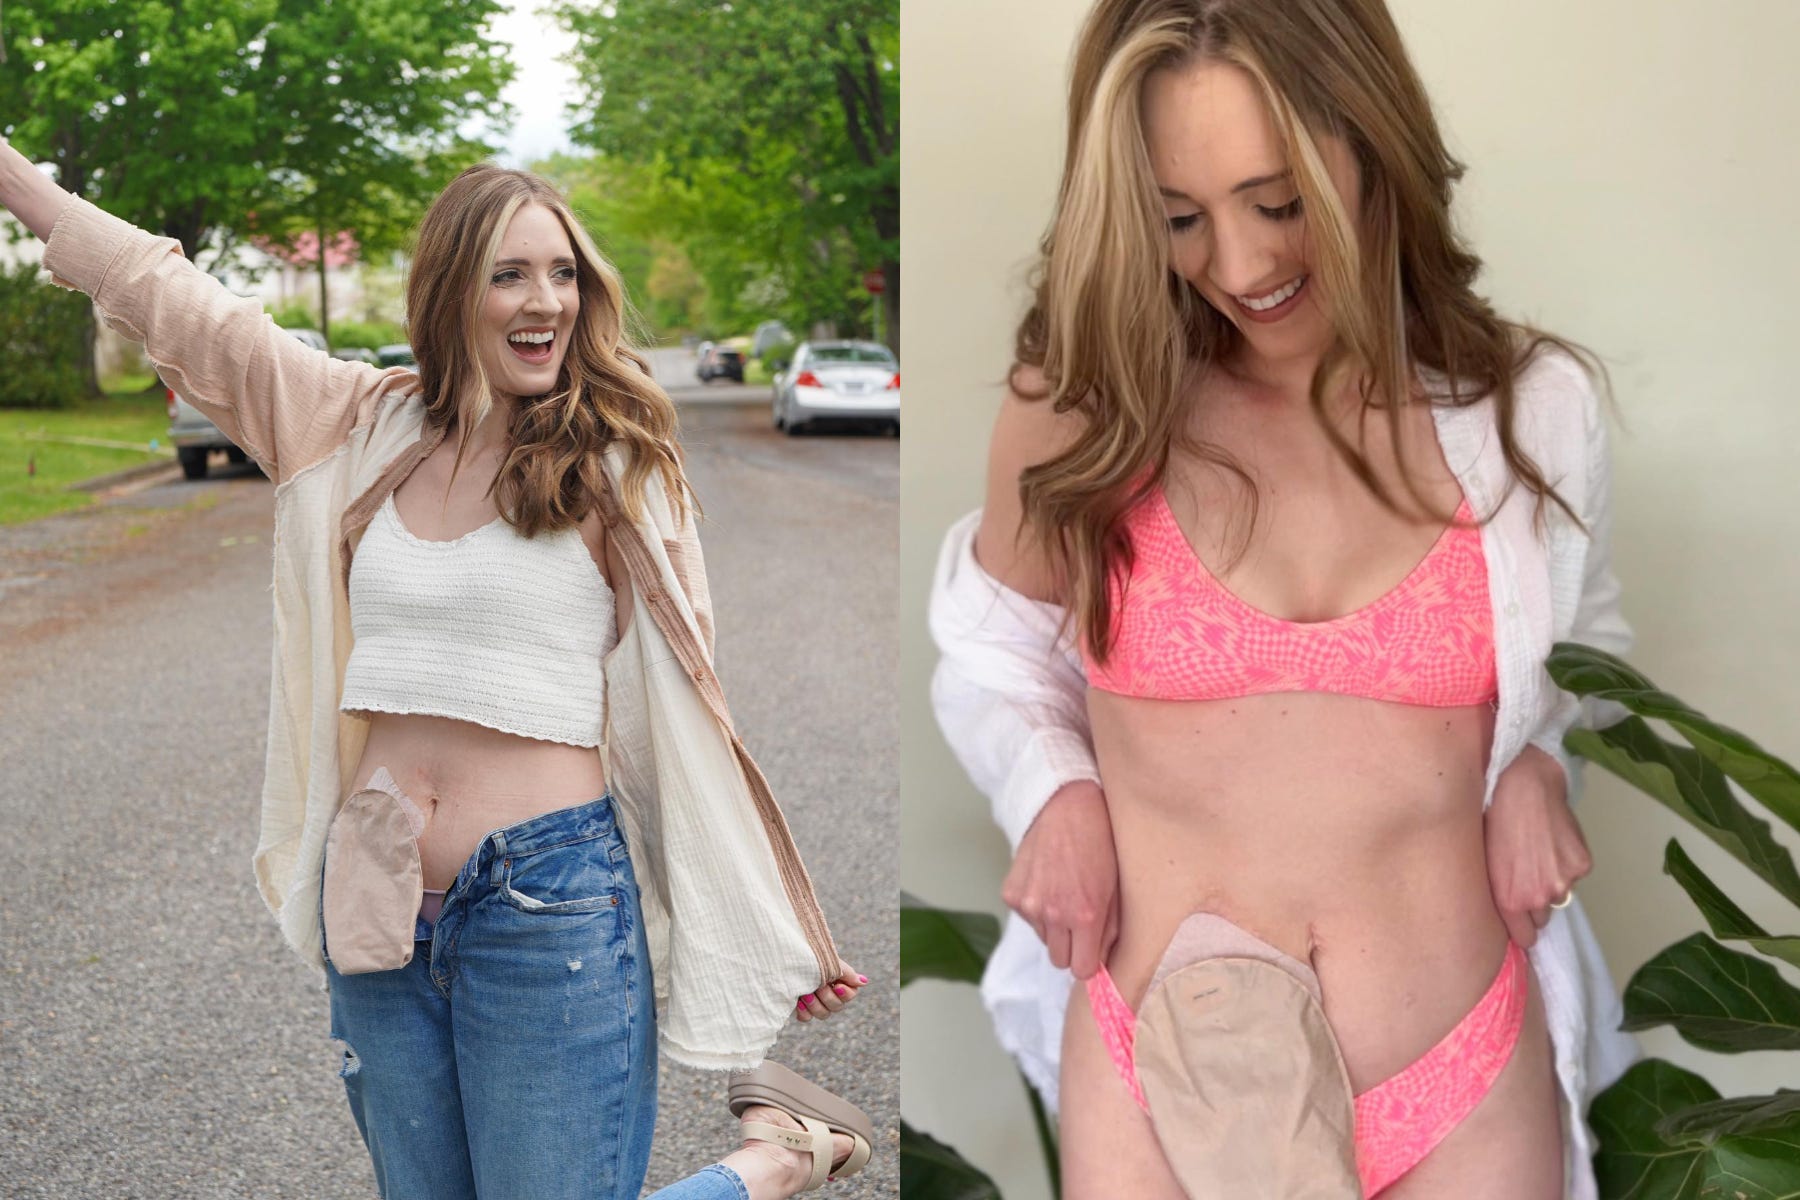 Mum shares snaps of body over the years saying 'change is not